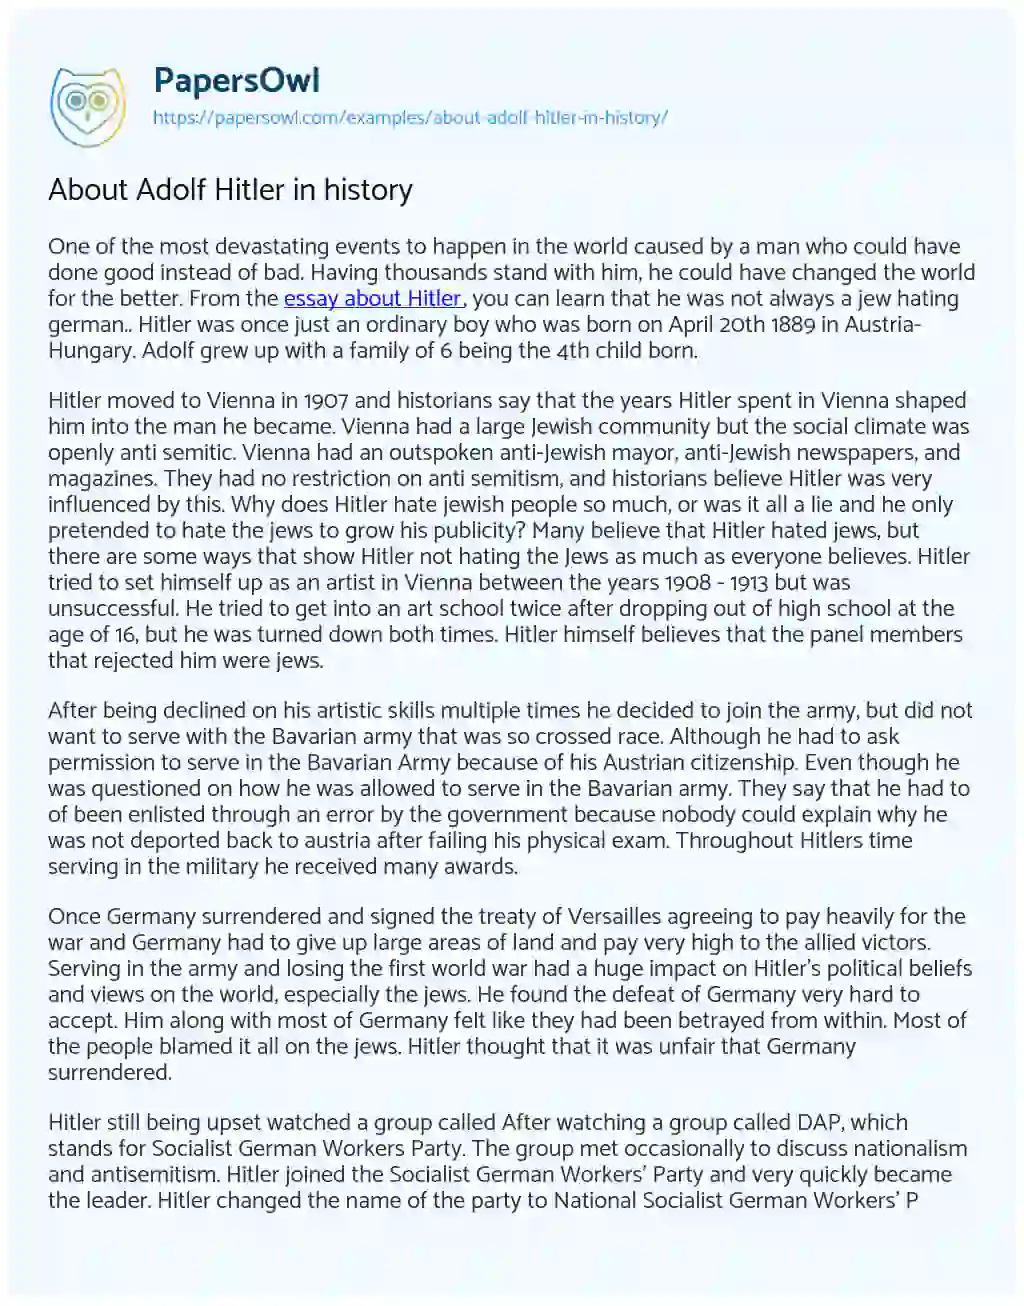 Essay on About Adolf Hitler in History